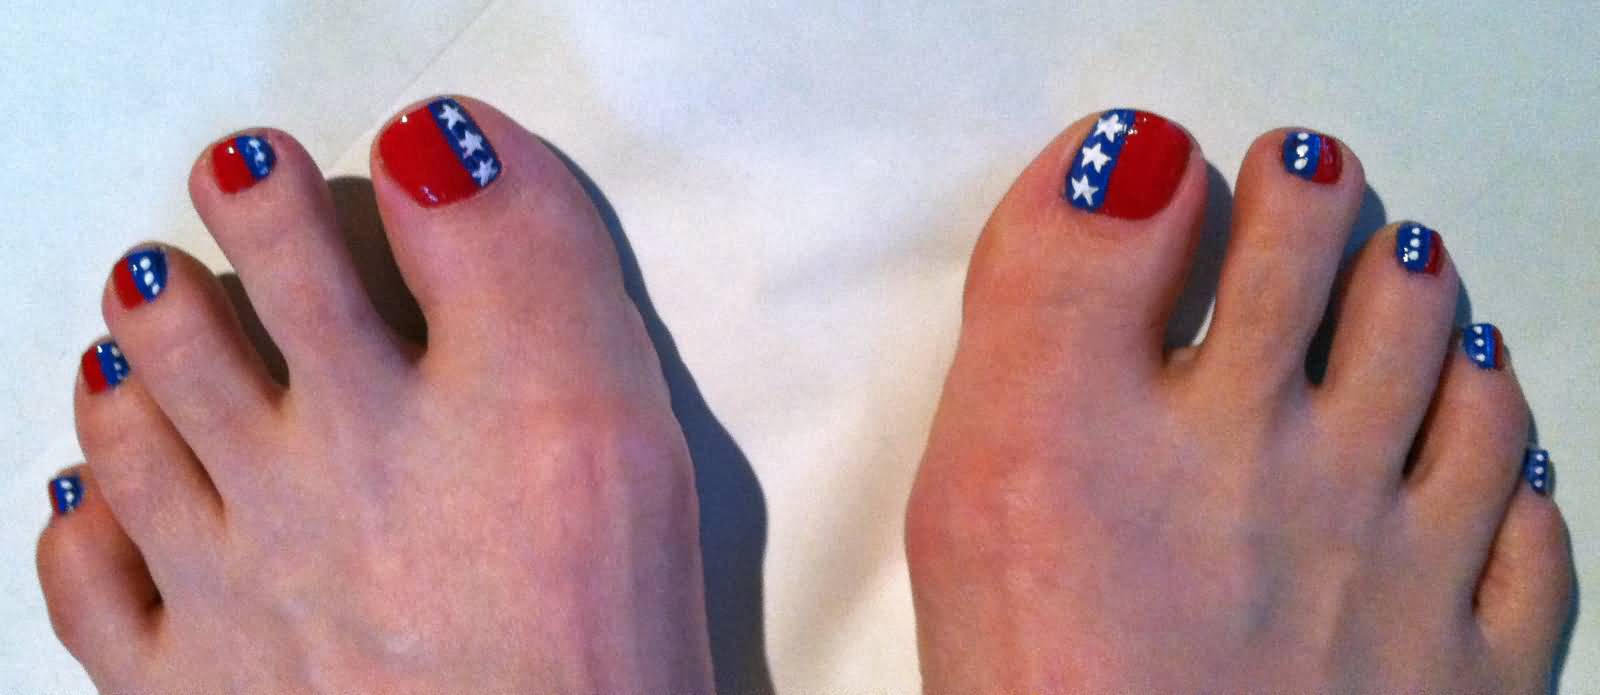 Red And Blue Nails With White Stars Fourth Of July Nail Art For Toe